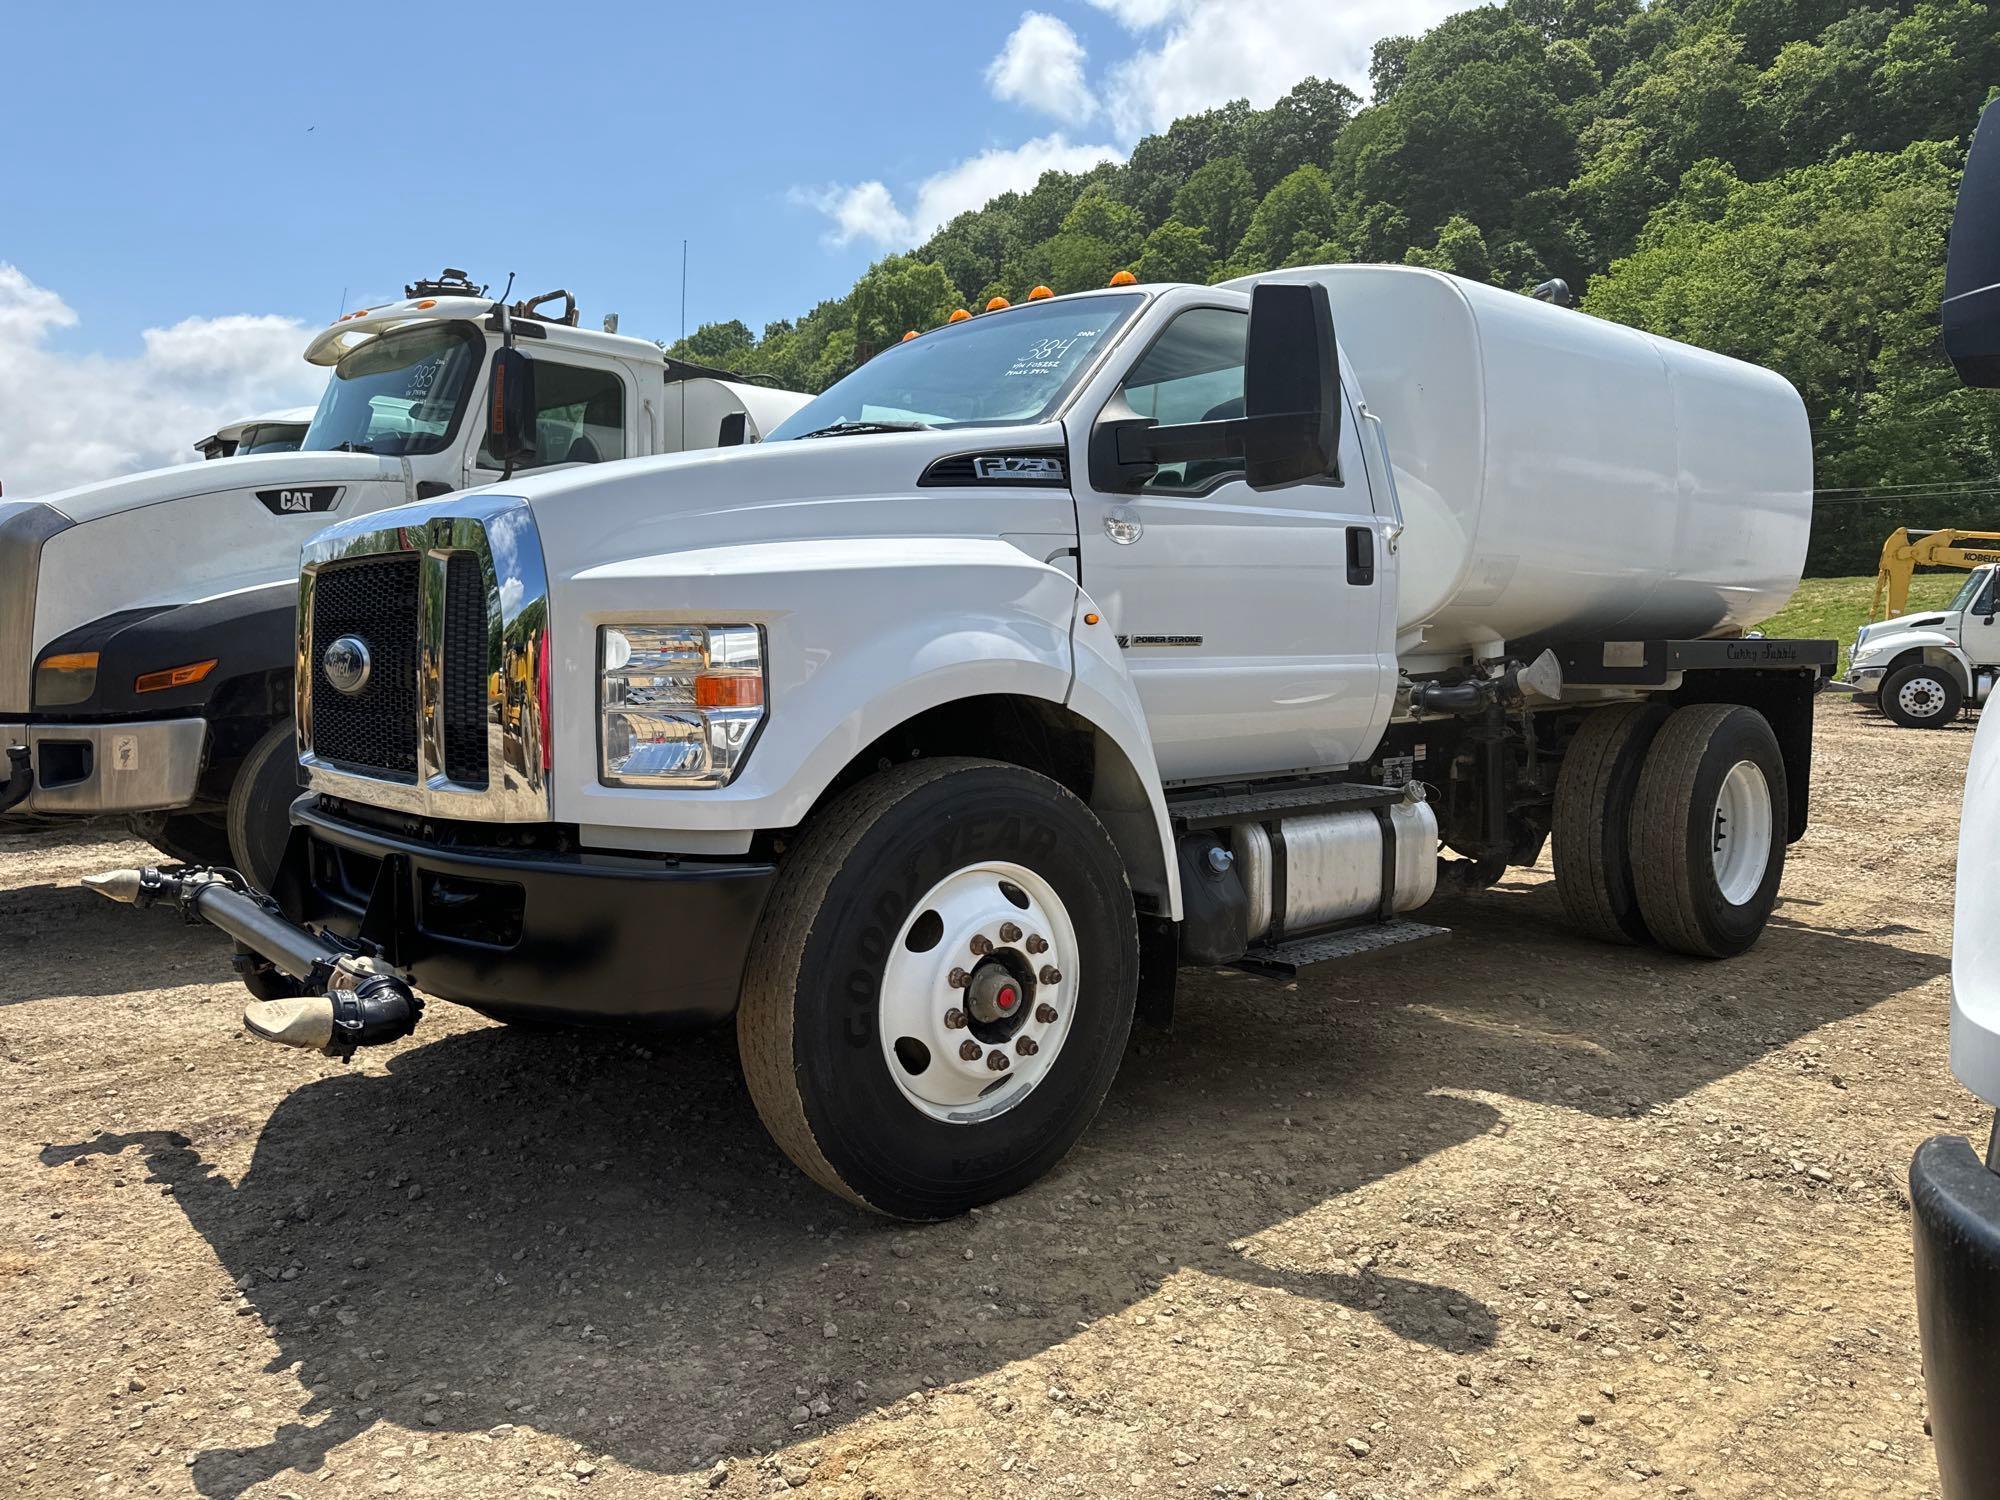 2018 FORD F750 WATER TRUCK VN:DF05252 powered by 6.7L diesel engine, equipped with automatic